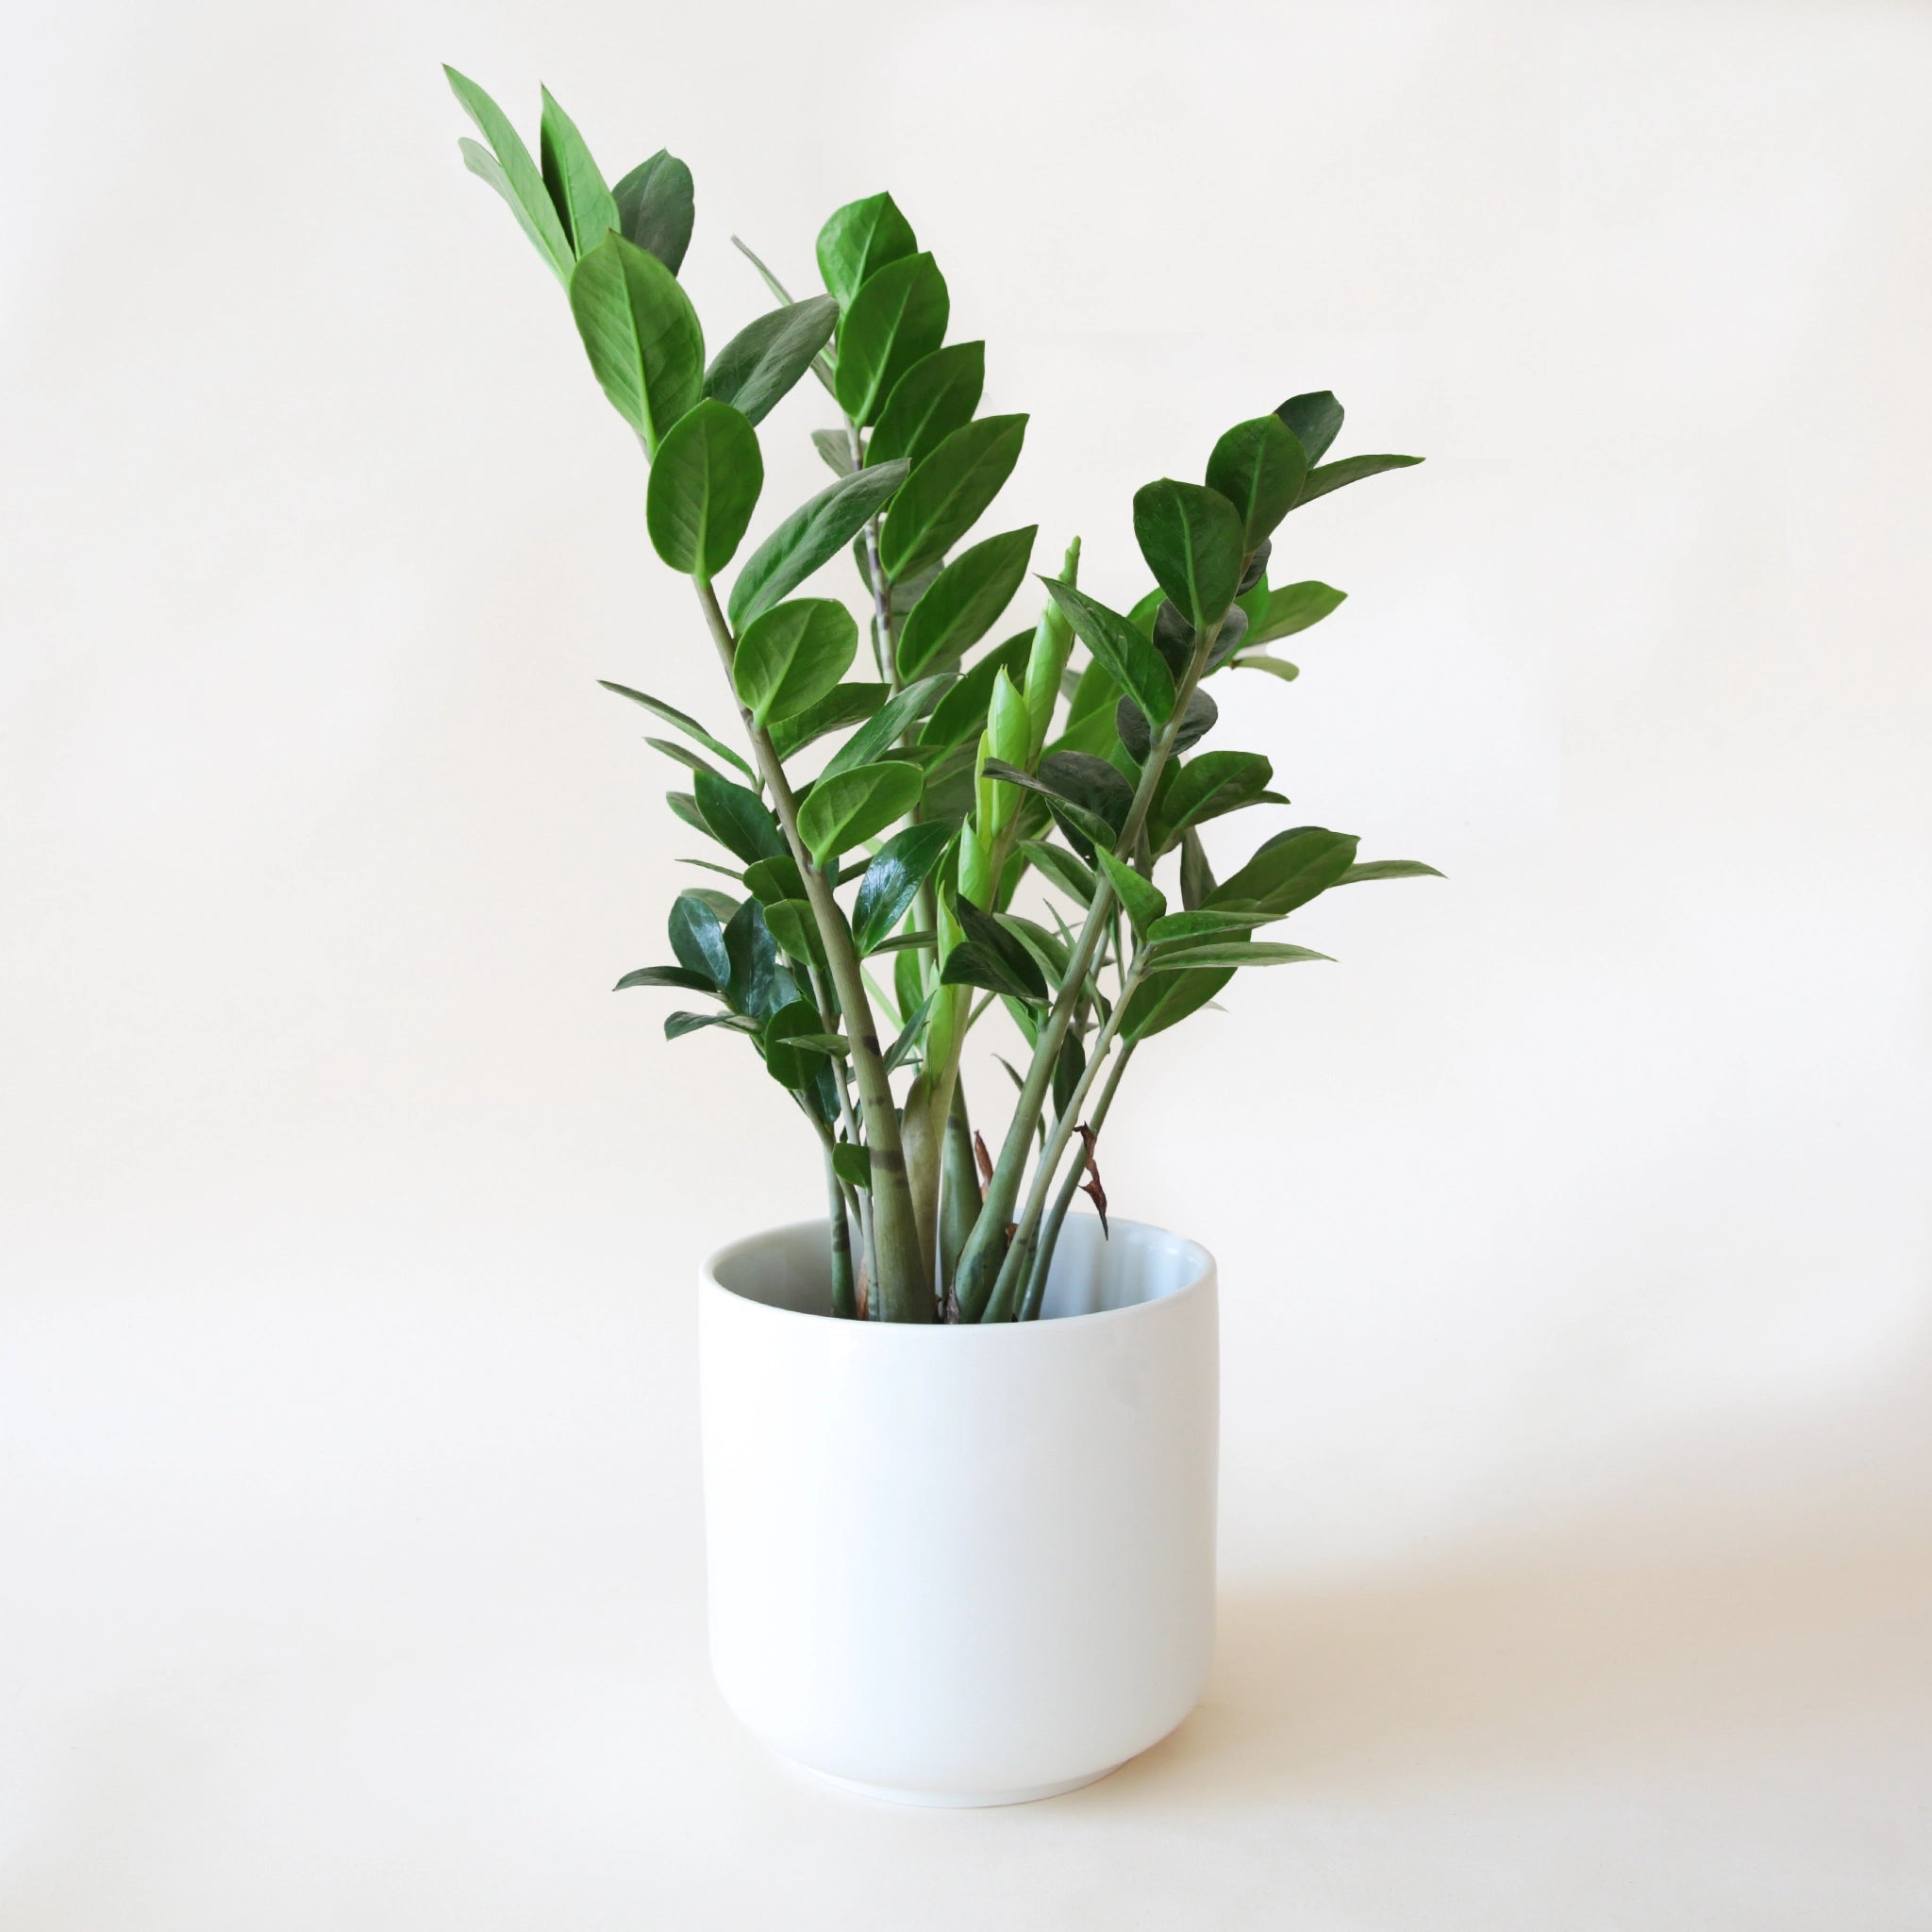 a zz plant with tall stems covered in small pointed leaves sits in a white pot